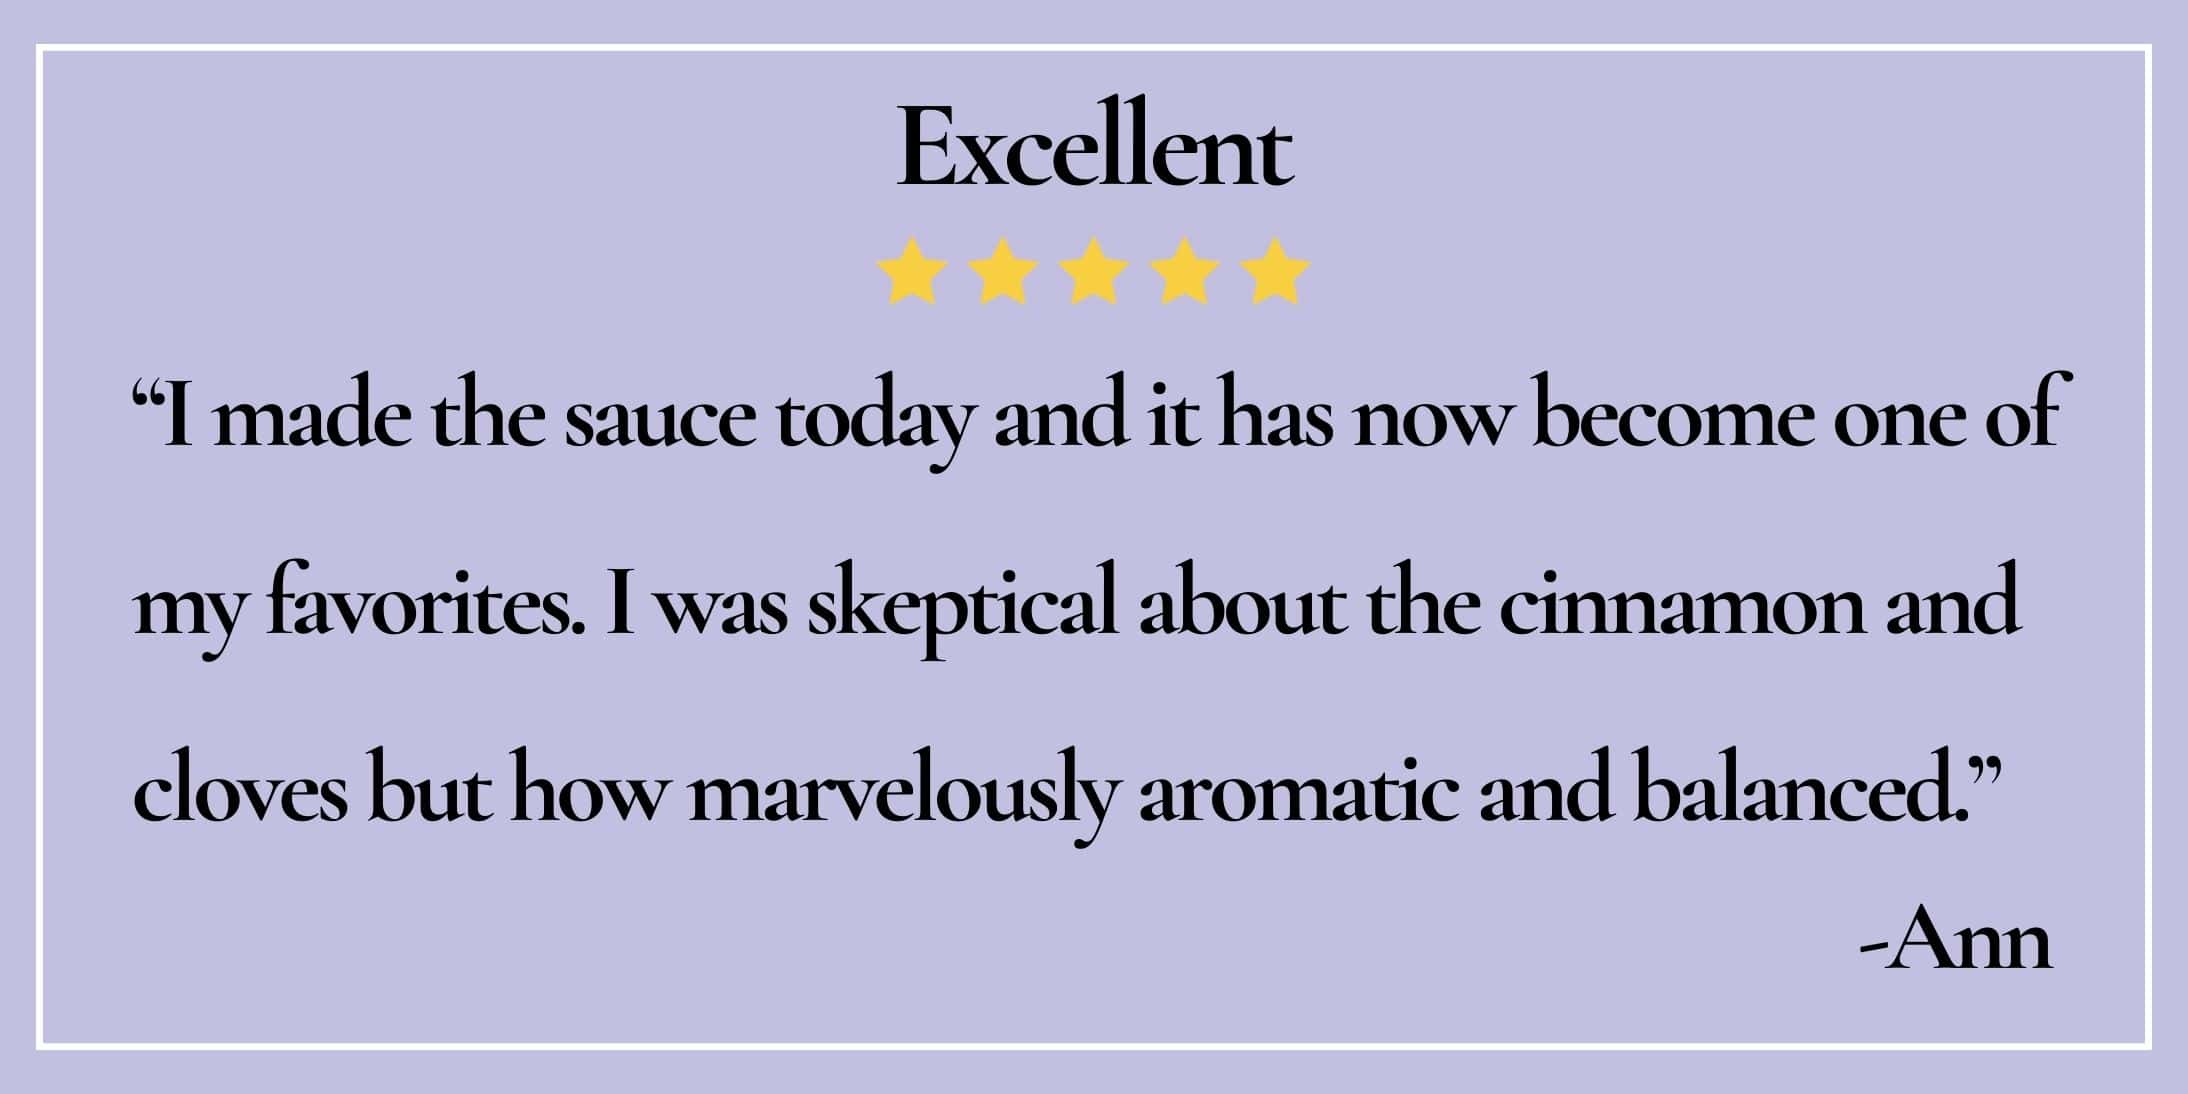 text box with paraphrase: I made the sauce today and it has now become one of my favorites...marvelously aromatic and balanced.-Ann